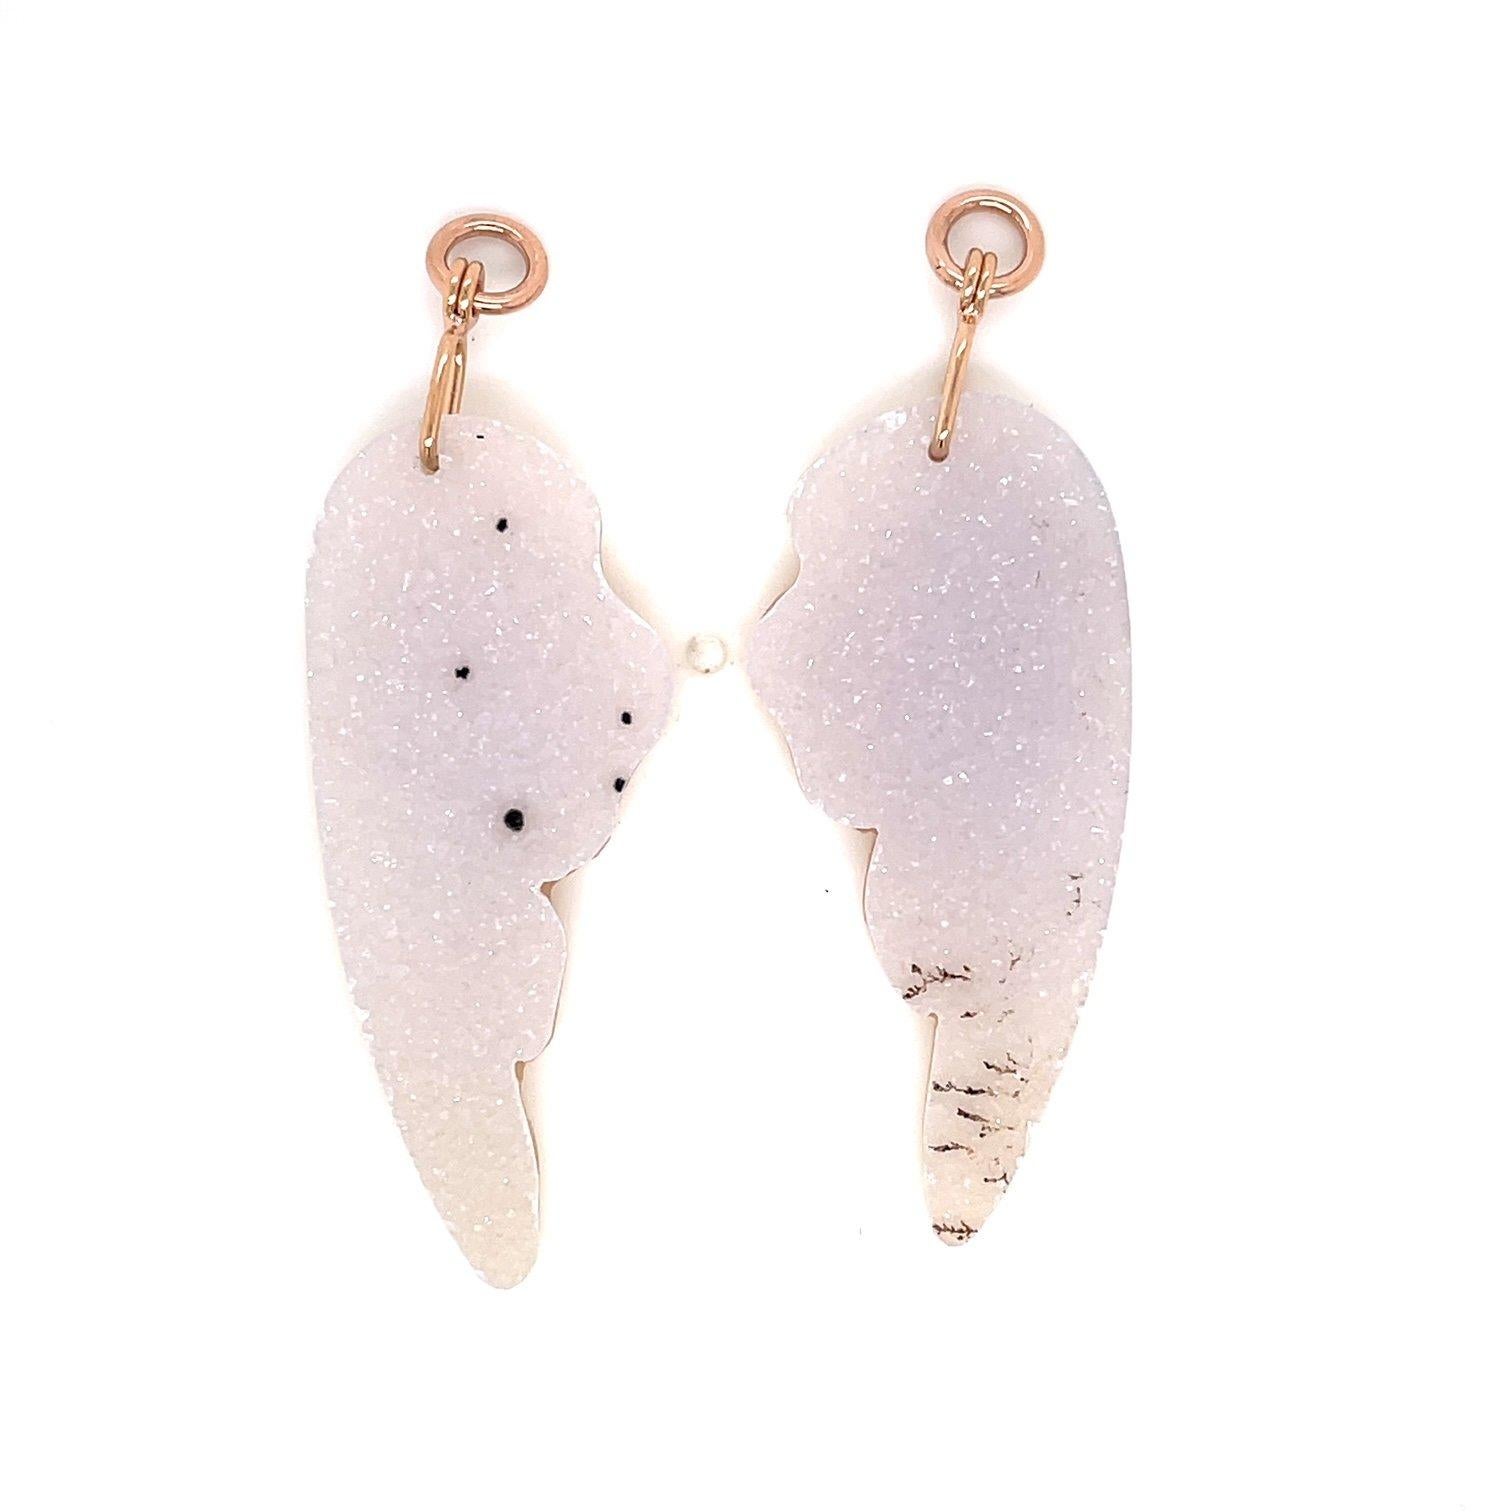 A pair of 18k rose gold bits and pieces studs, with a pair of carved white druzy wing jackets with 18k rose gold. These earrings were made and designed by llyn strong.

Items sold separately upon request.